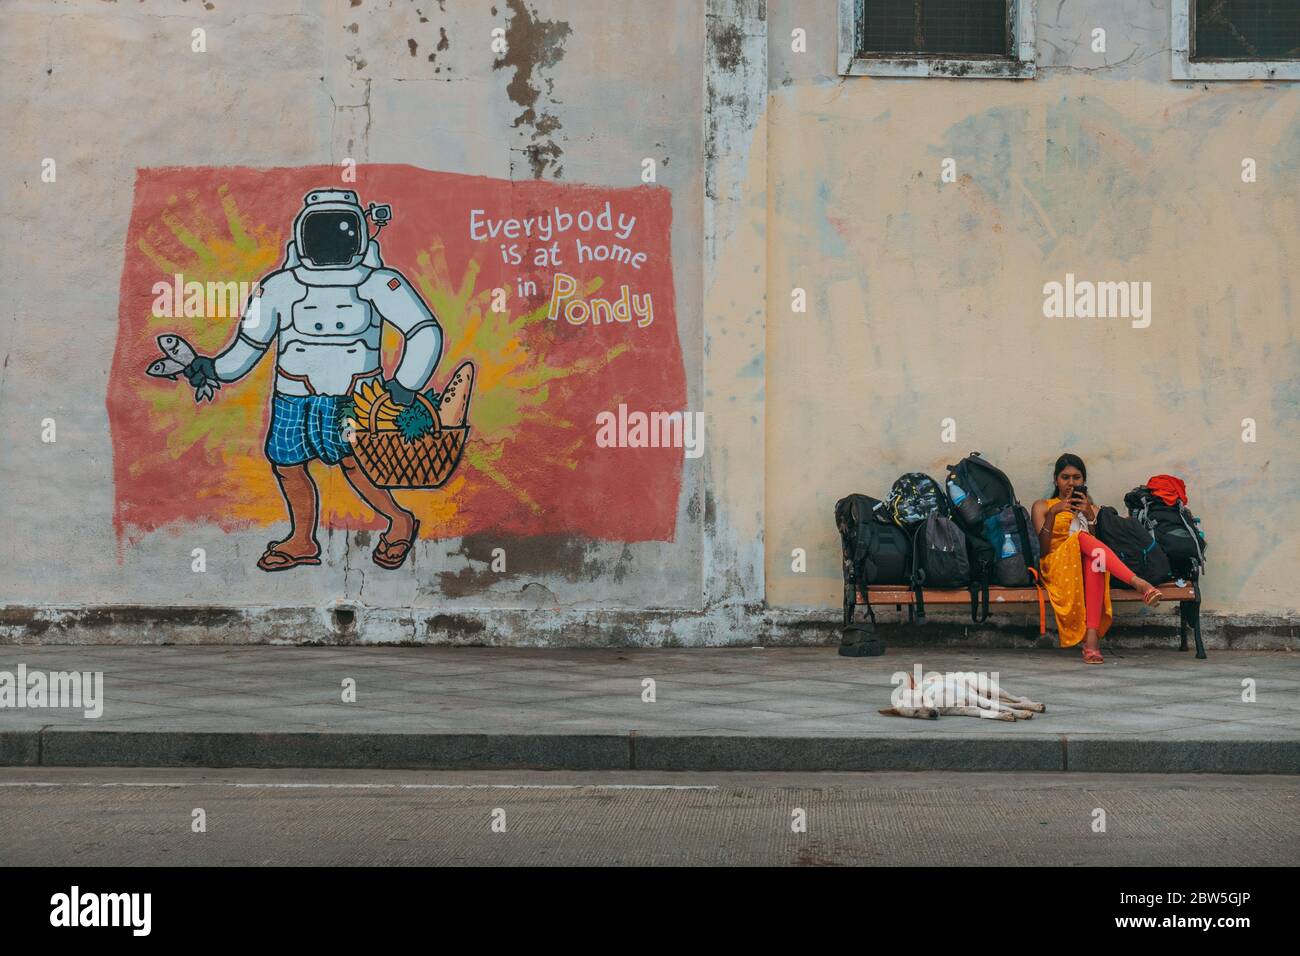 A woman waits with luggage on a bench next to street art with the text 'Everybody is at home in Pondy' in Pondicherry, India Stock Photo